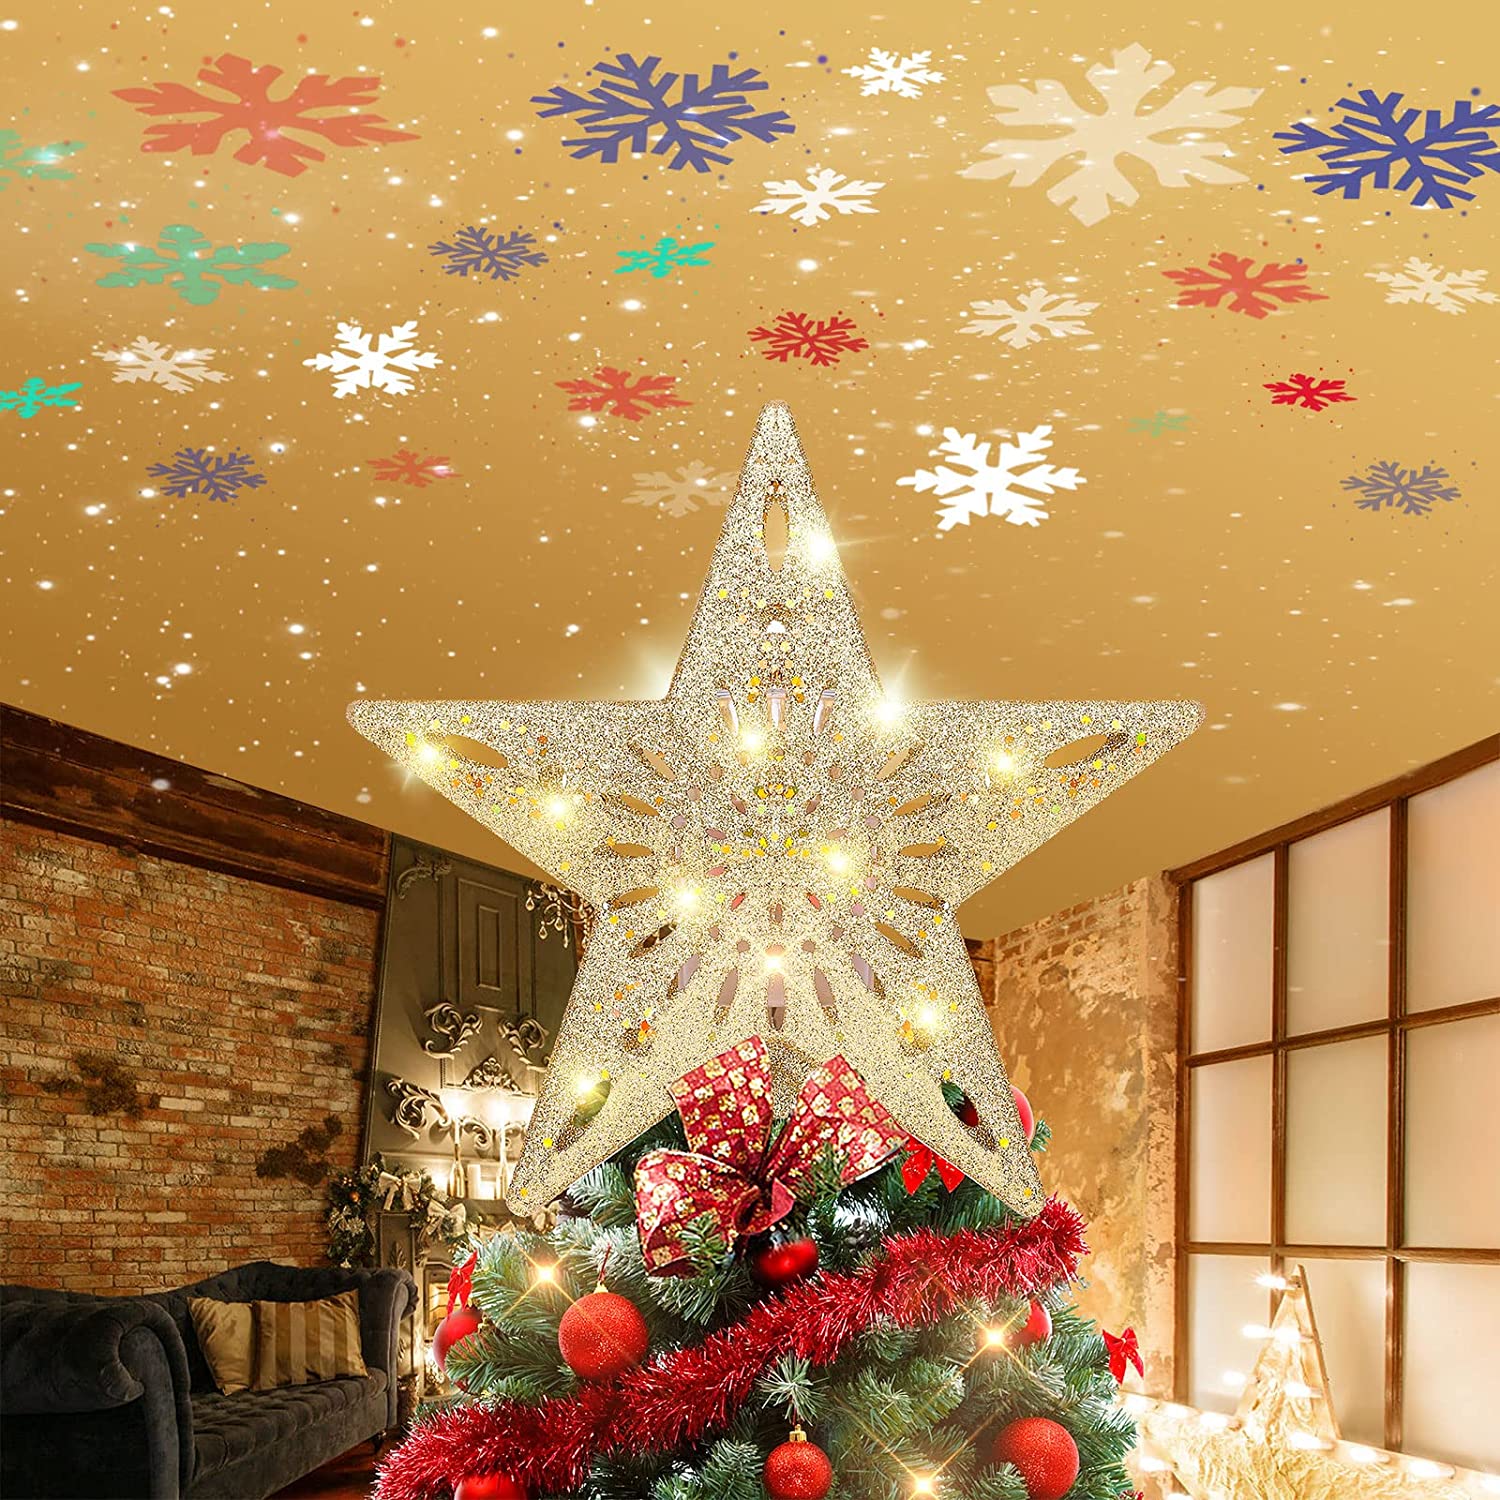 GDCB Christmas Tree Topper Lighted Star 5 Point Christmas Tree Star with Snowflake Projector Lights Decorations for Indoor Home Décor 